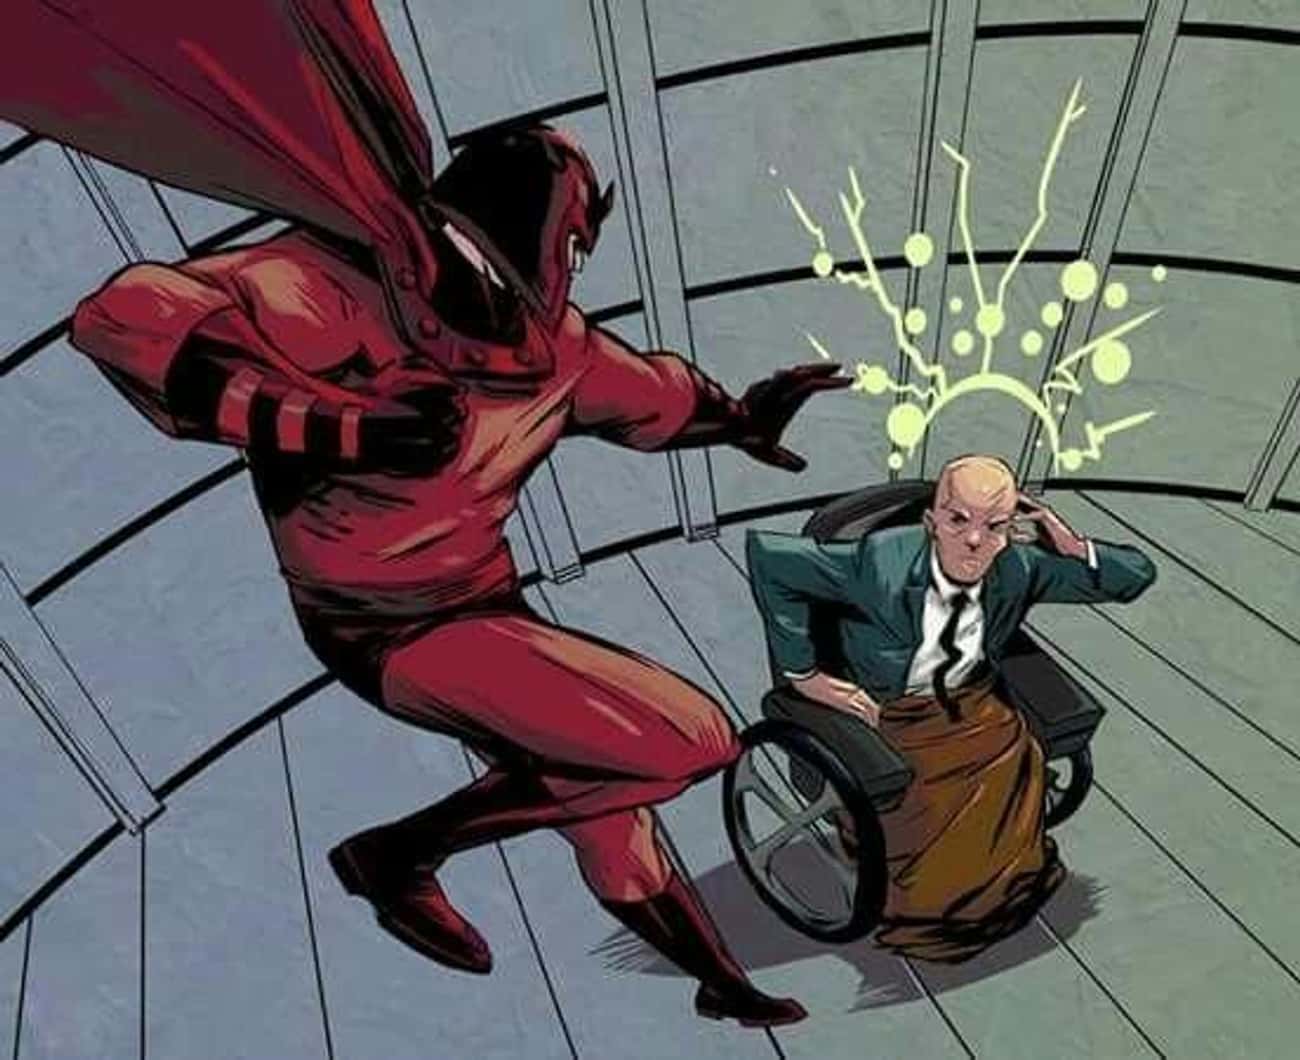 Professor X And Magneto Are The Original BFFs-Turned-Enemies-Turned-BFFs